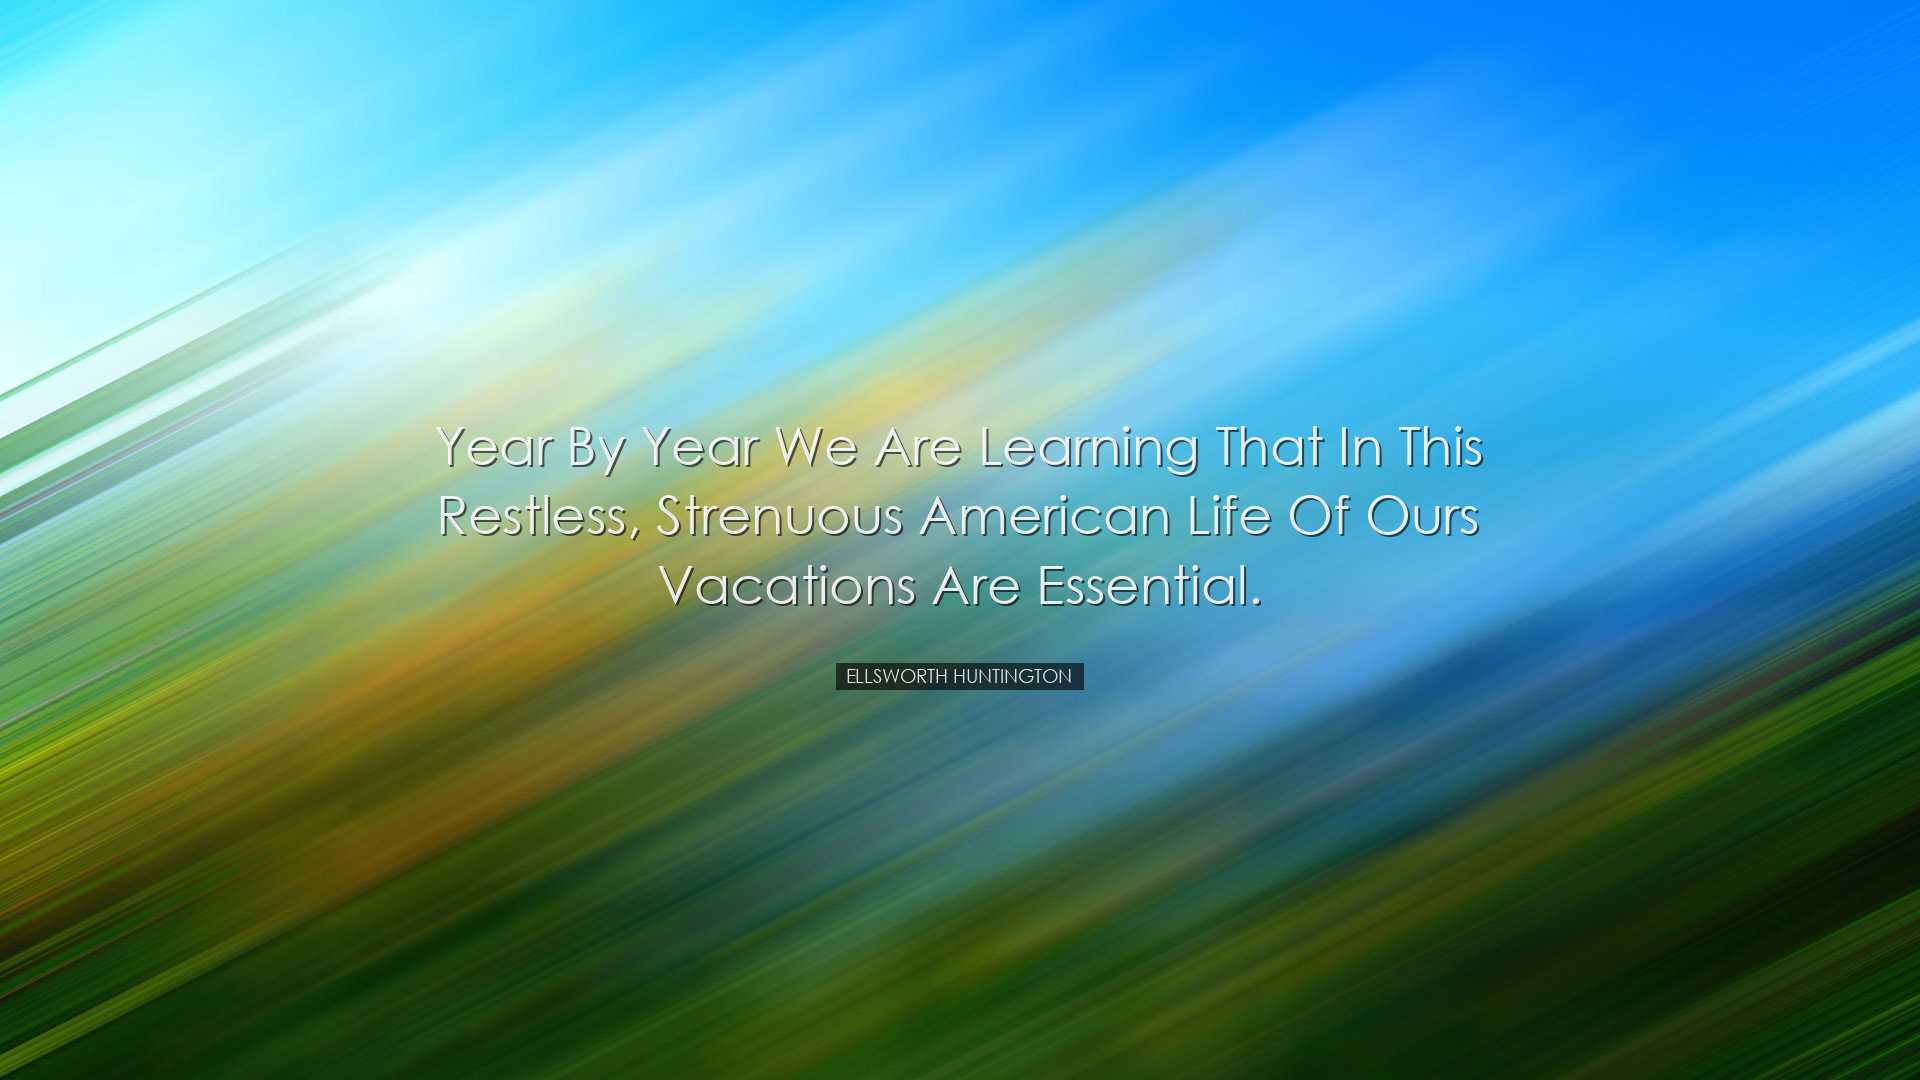 Year by year we are learning that in this restless, strenuous Amer